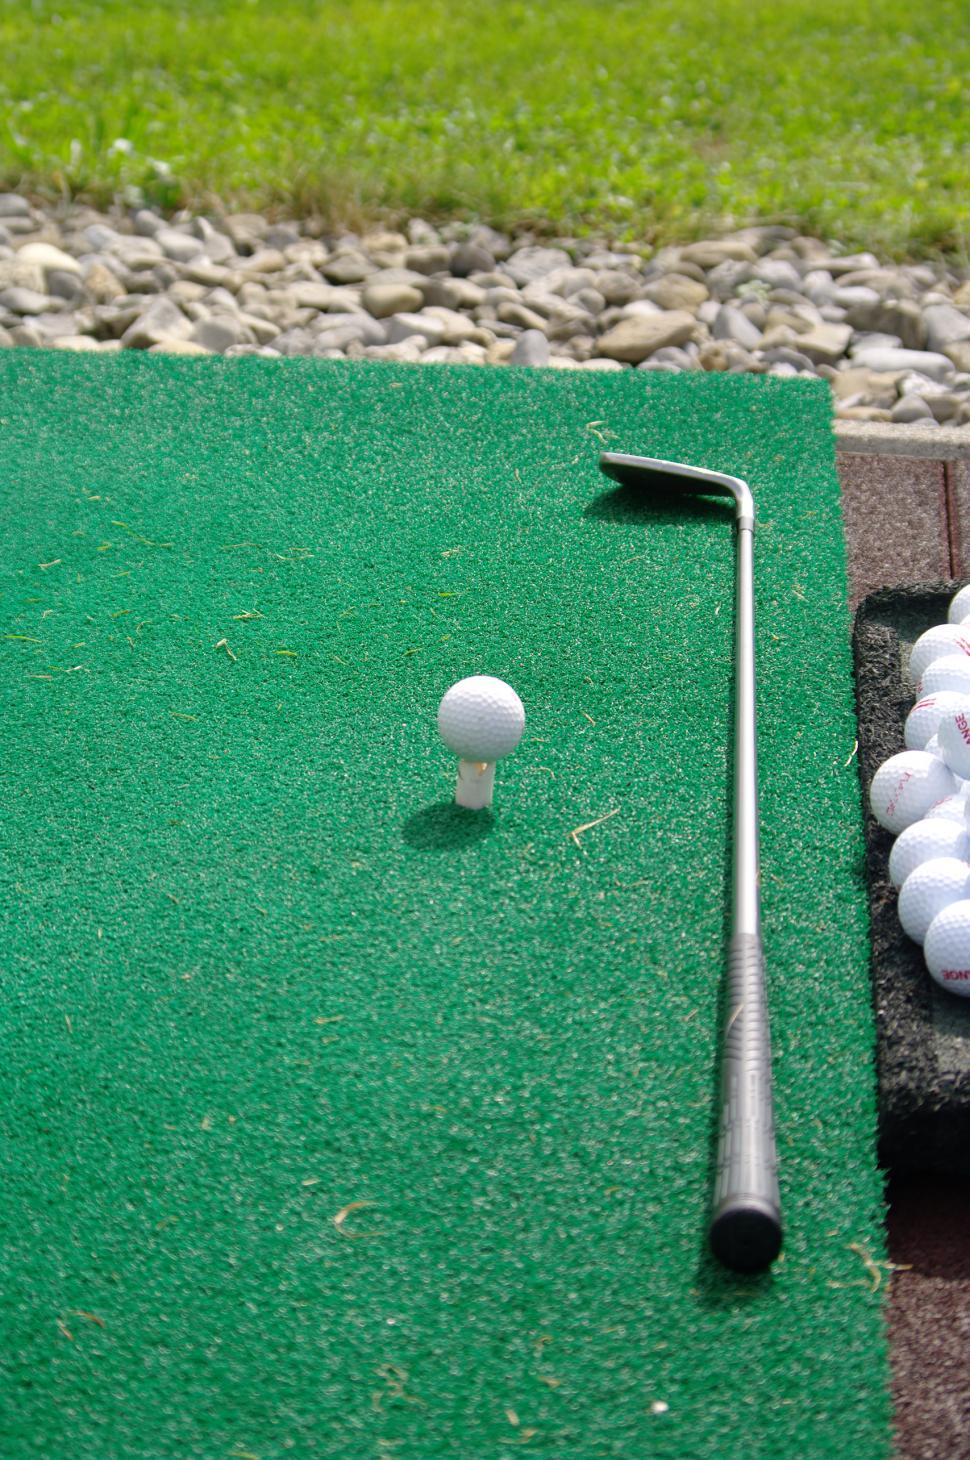 Free Image of Miniature Golf Course With Balls and Golf Club 